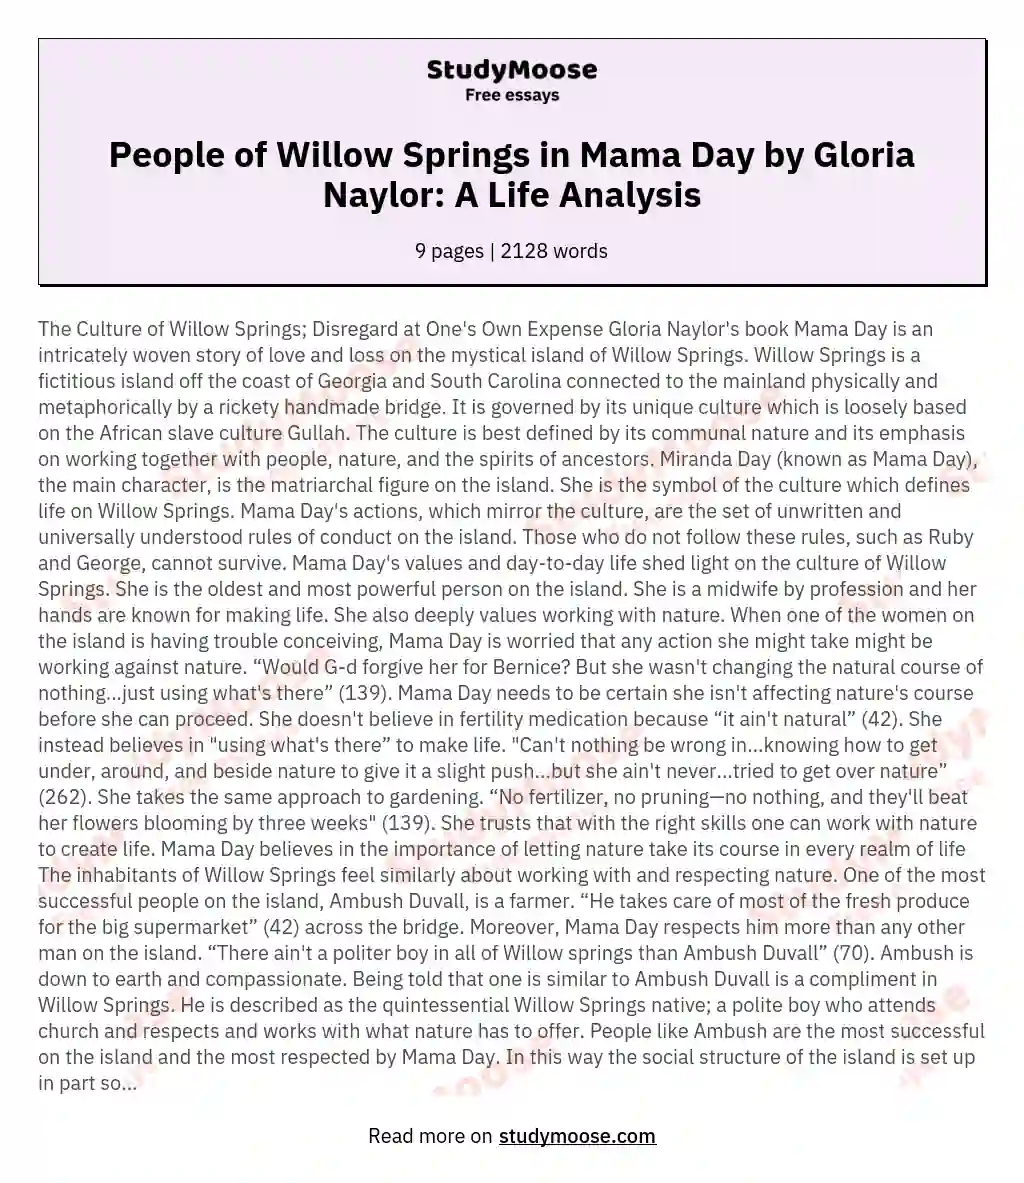 People of Willow Springs in Mama Day by Gloria Naylor: A Life Analysis essay